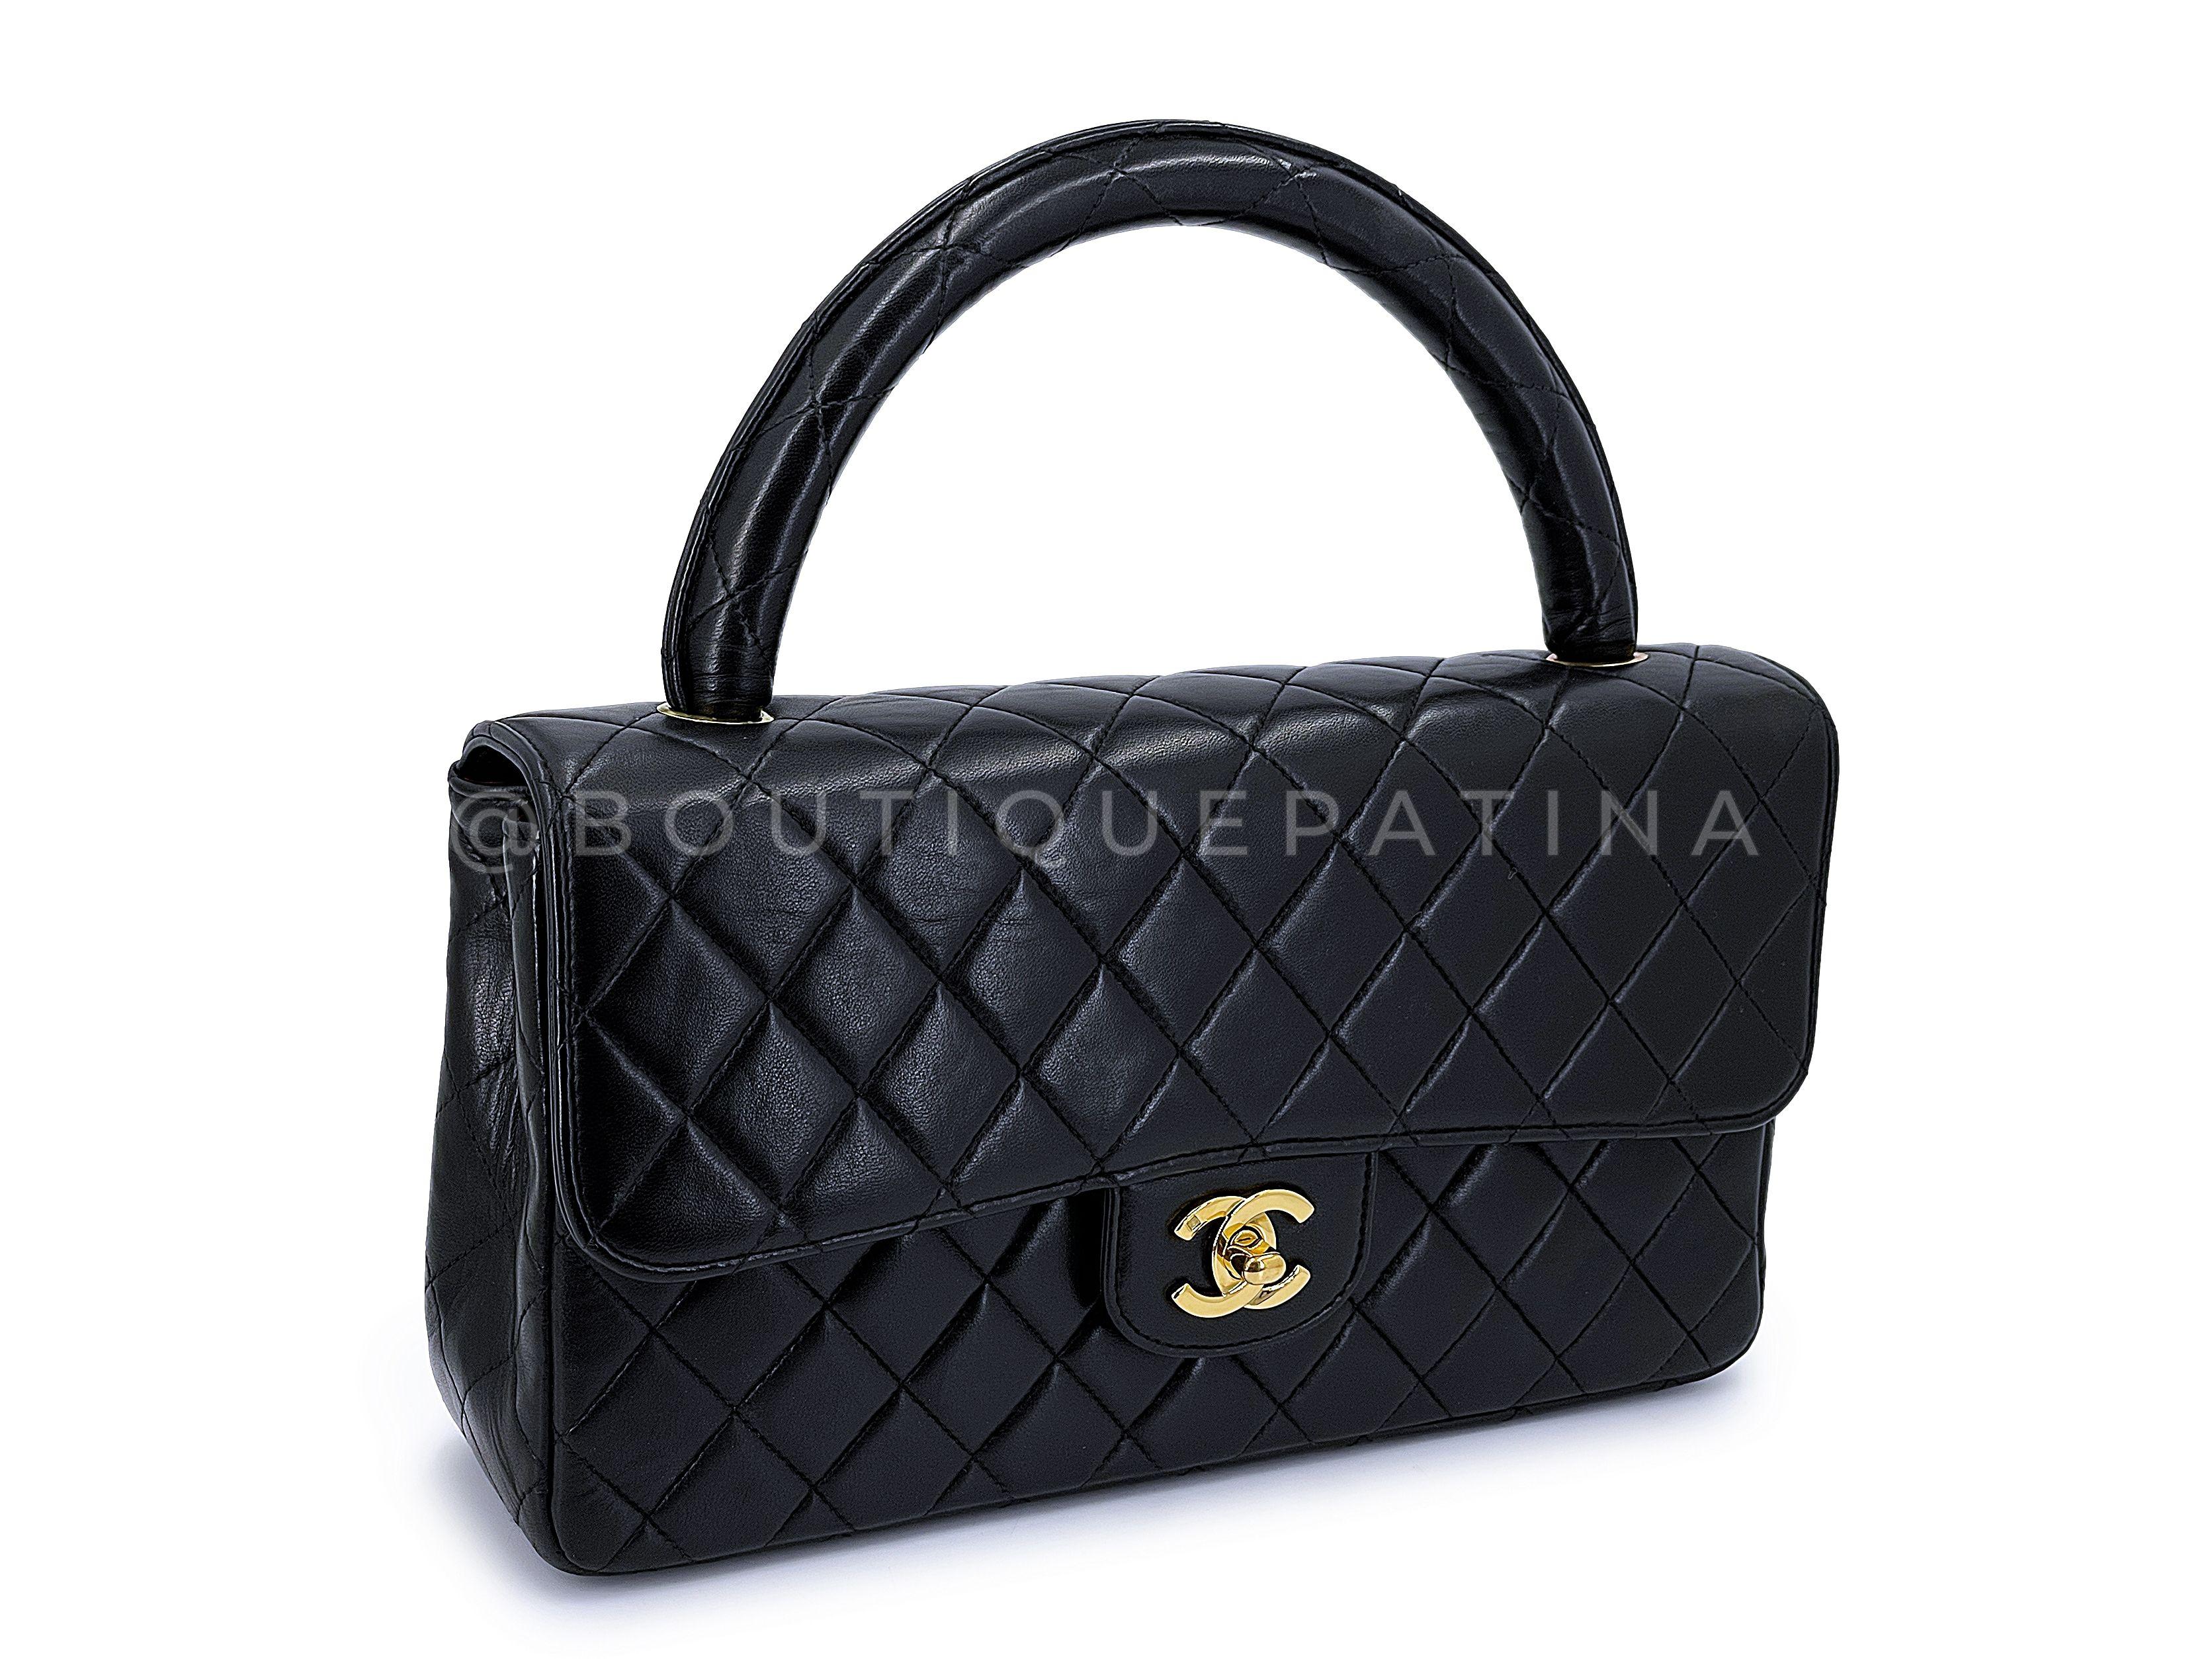 Store item: 66669
A super rare collectible is this model - a medium quilted flap base with a rolled quilted leather handle. A collector's essential treasure is this hard-to-find mother and child vintage Chanel kelly set with golden carabiner.

If